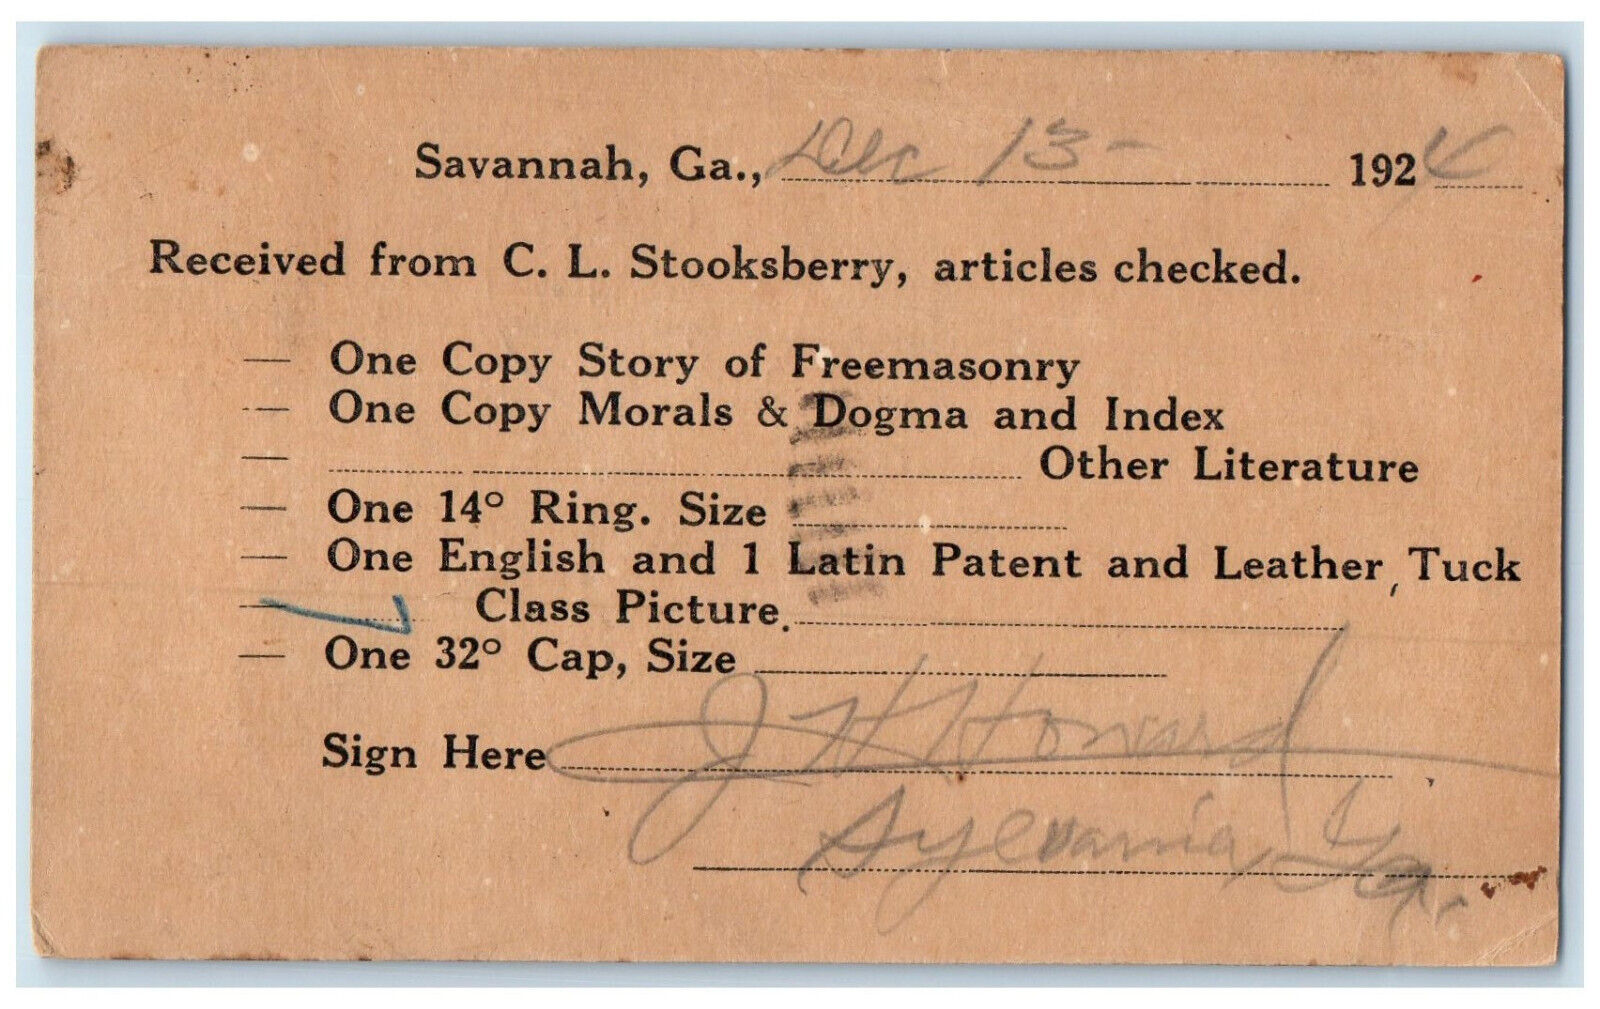 1924 Received from CL Stooksberry Savannah Georgia GA Genl Secty Postal Card